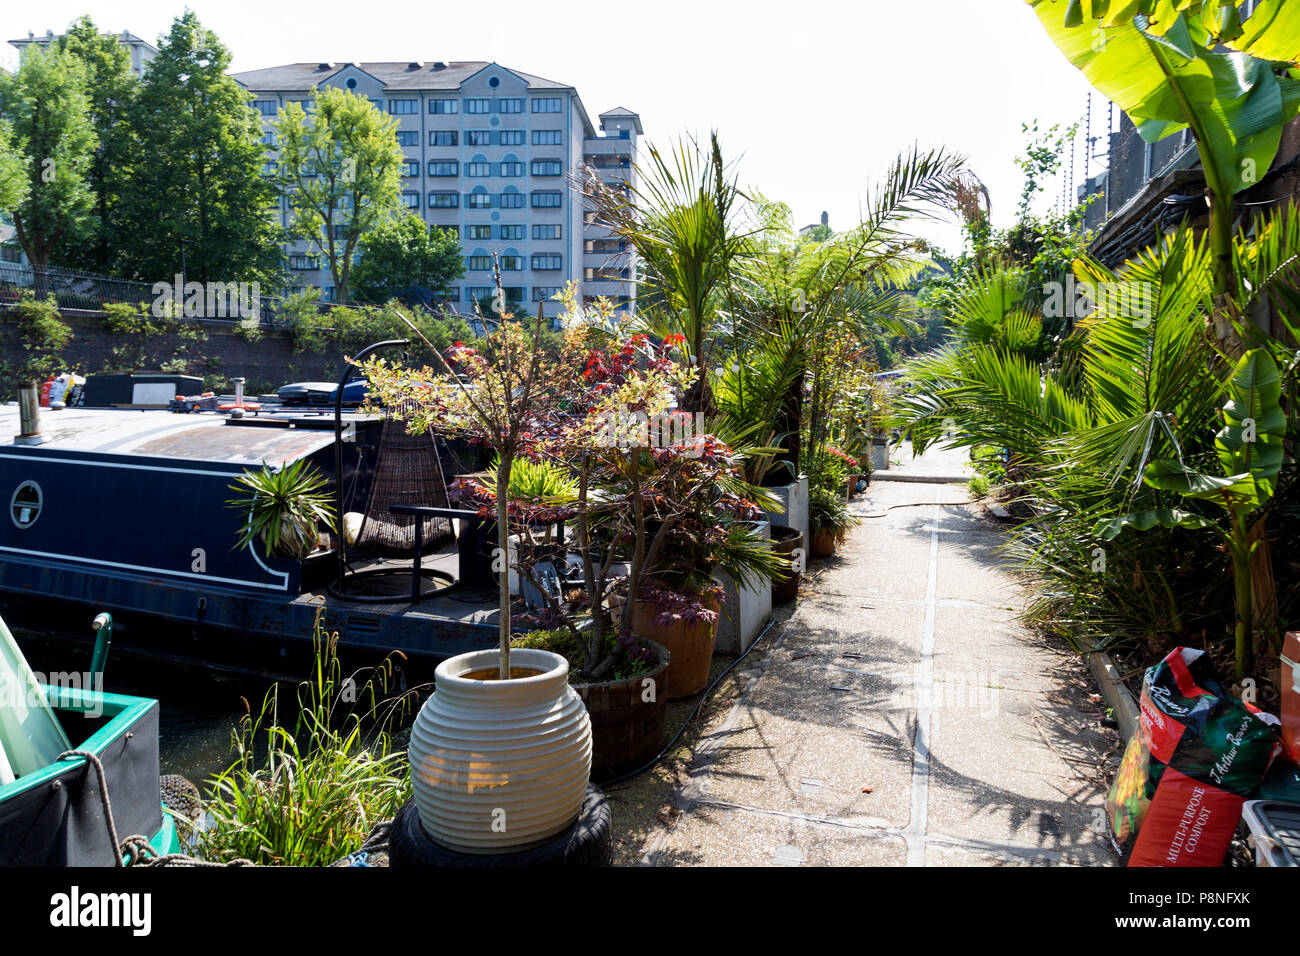 Moored houseboats and path on the Regents Canal by a narrowboat community, plants and flowers, London, UK Stock Photo